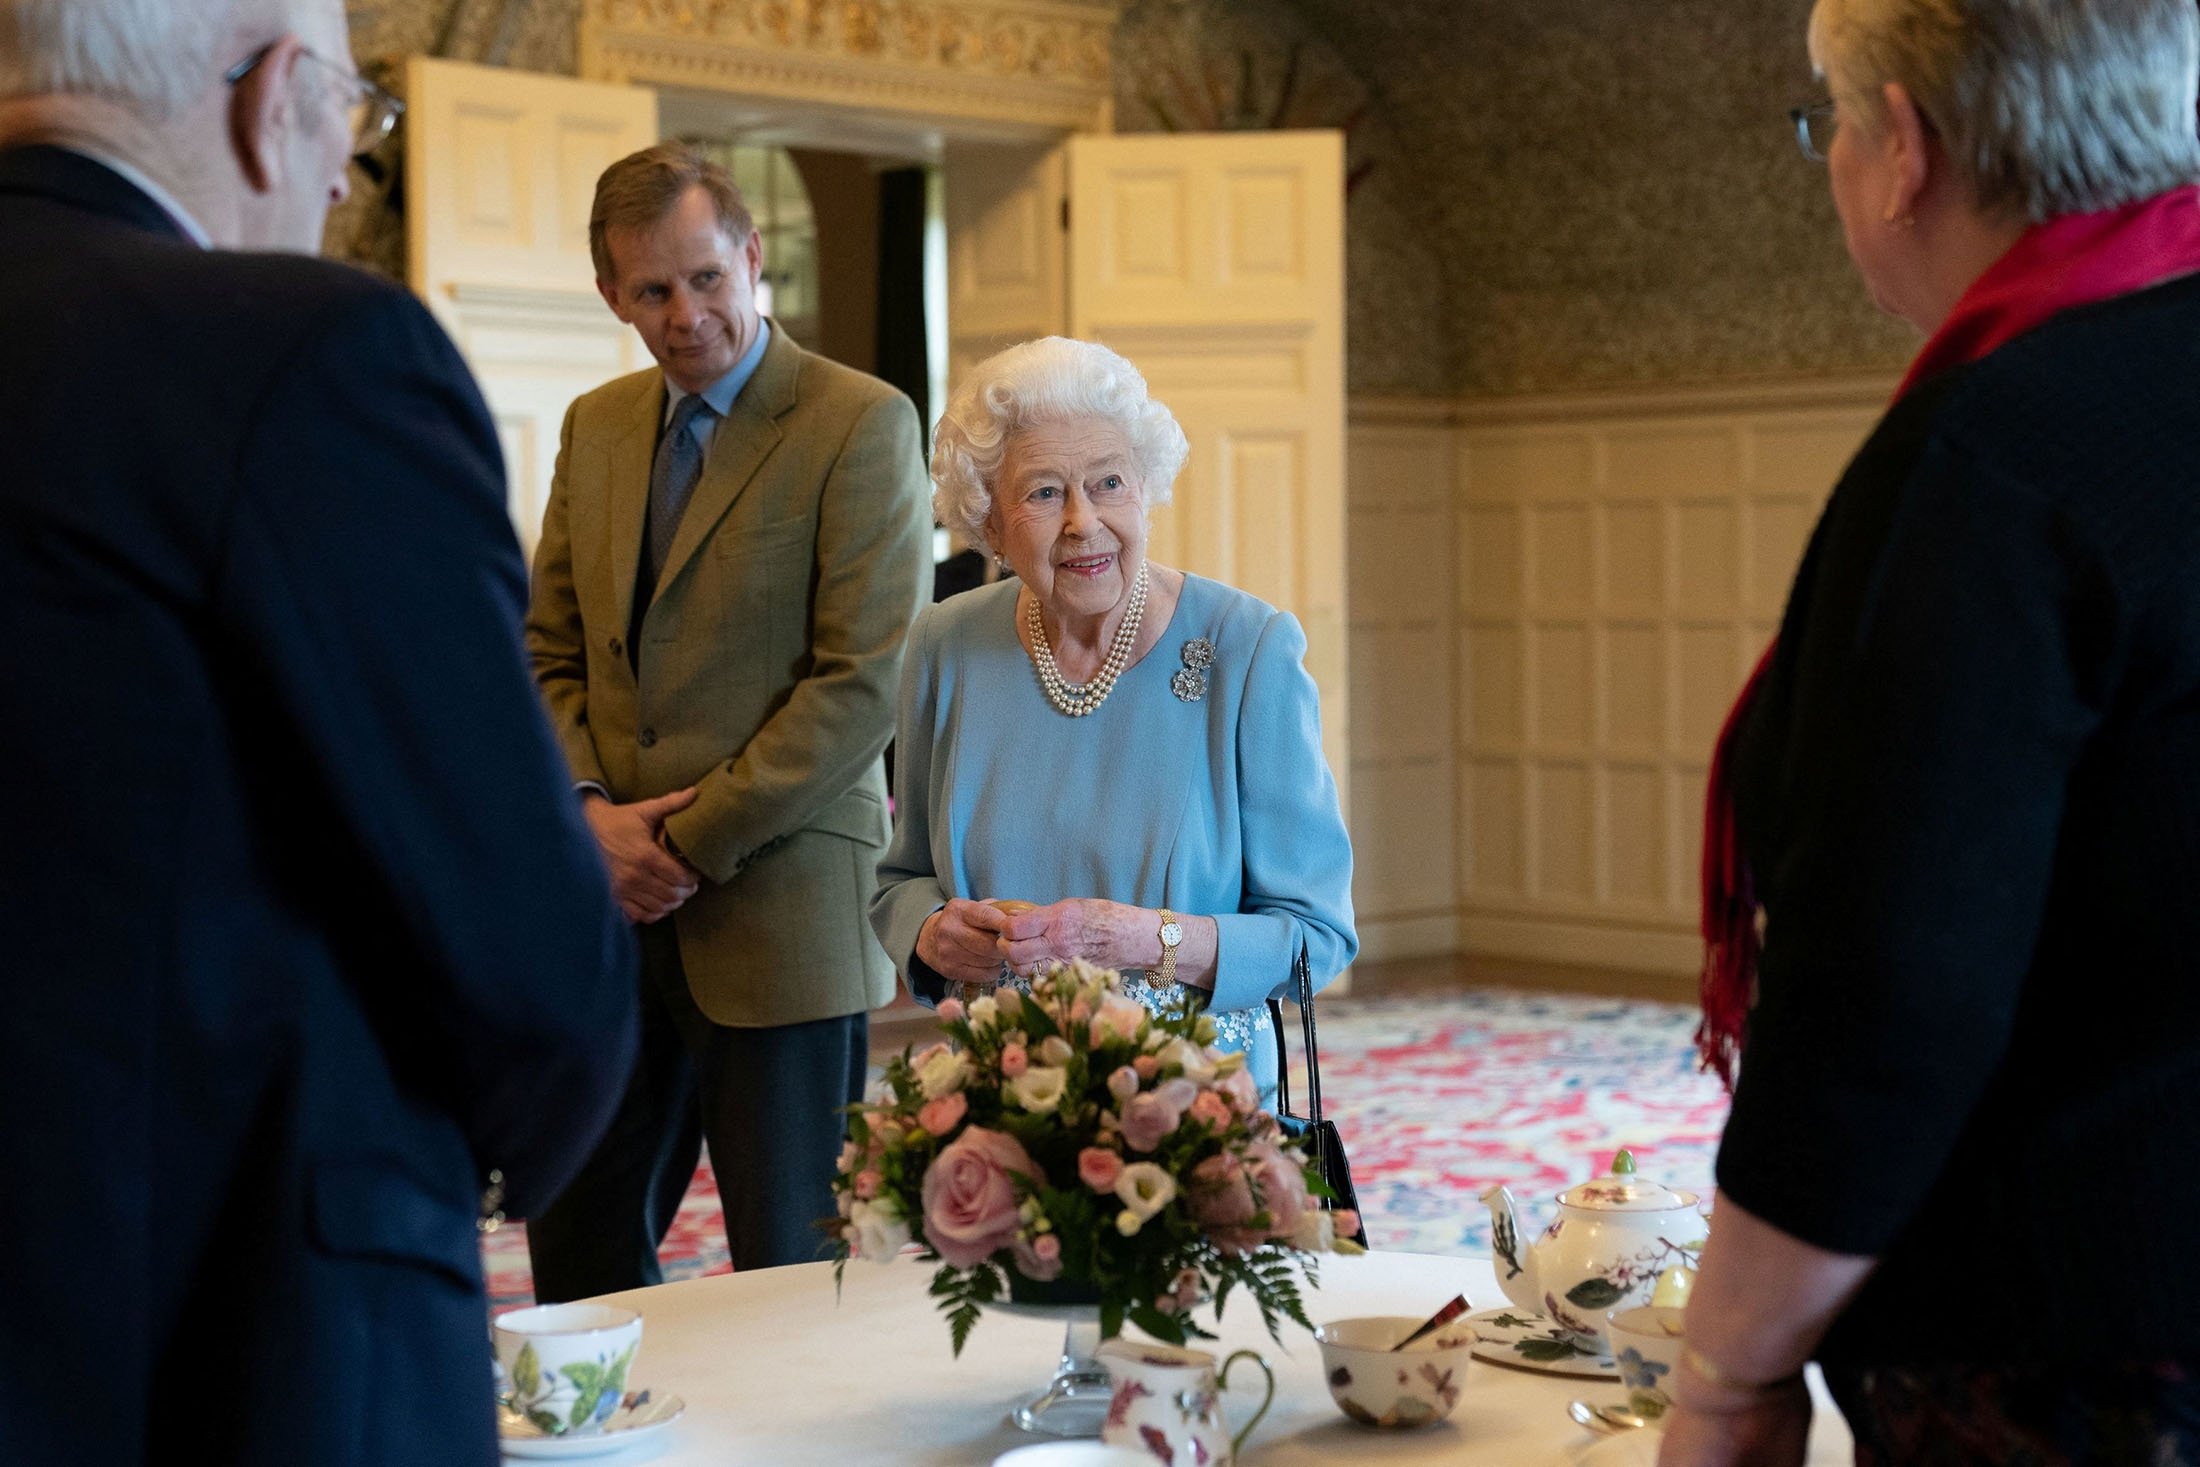 Britain's Queen Elizabeth talks to pensioners from the Sandringham Estate during a reception at the Ballroom of Sandringham House, the Queen's residence in Norfolk, U.K., Feb. 5, 2022. (Reuters Photo)